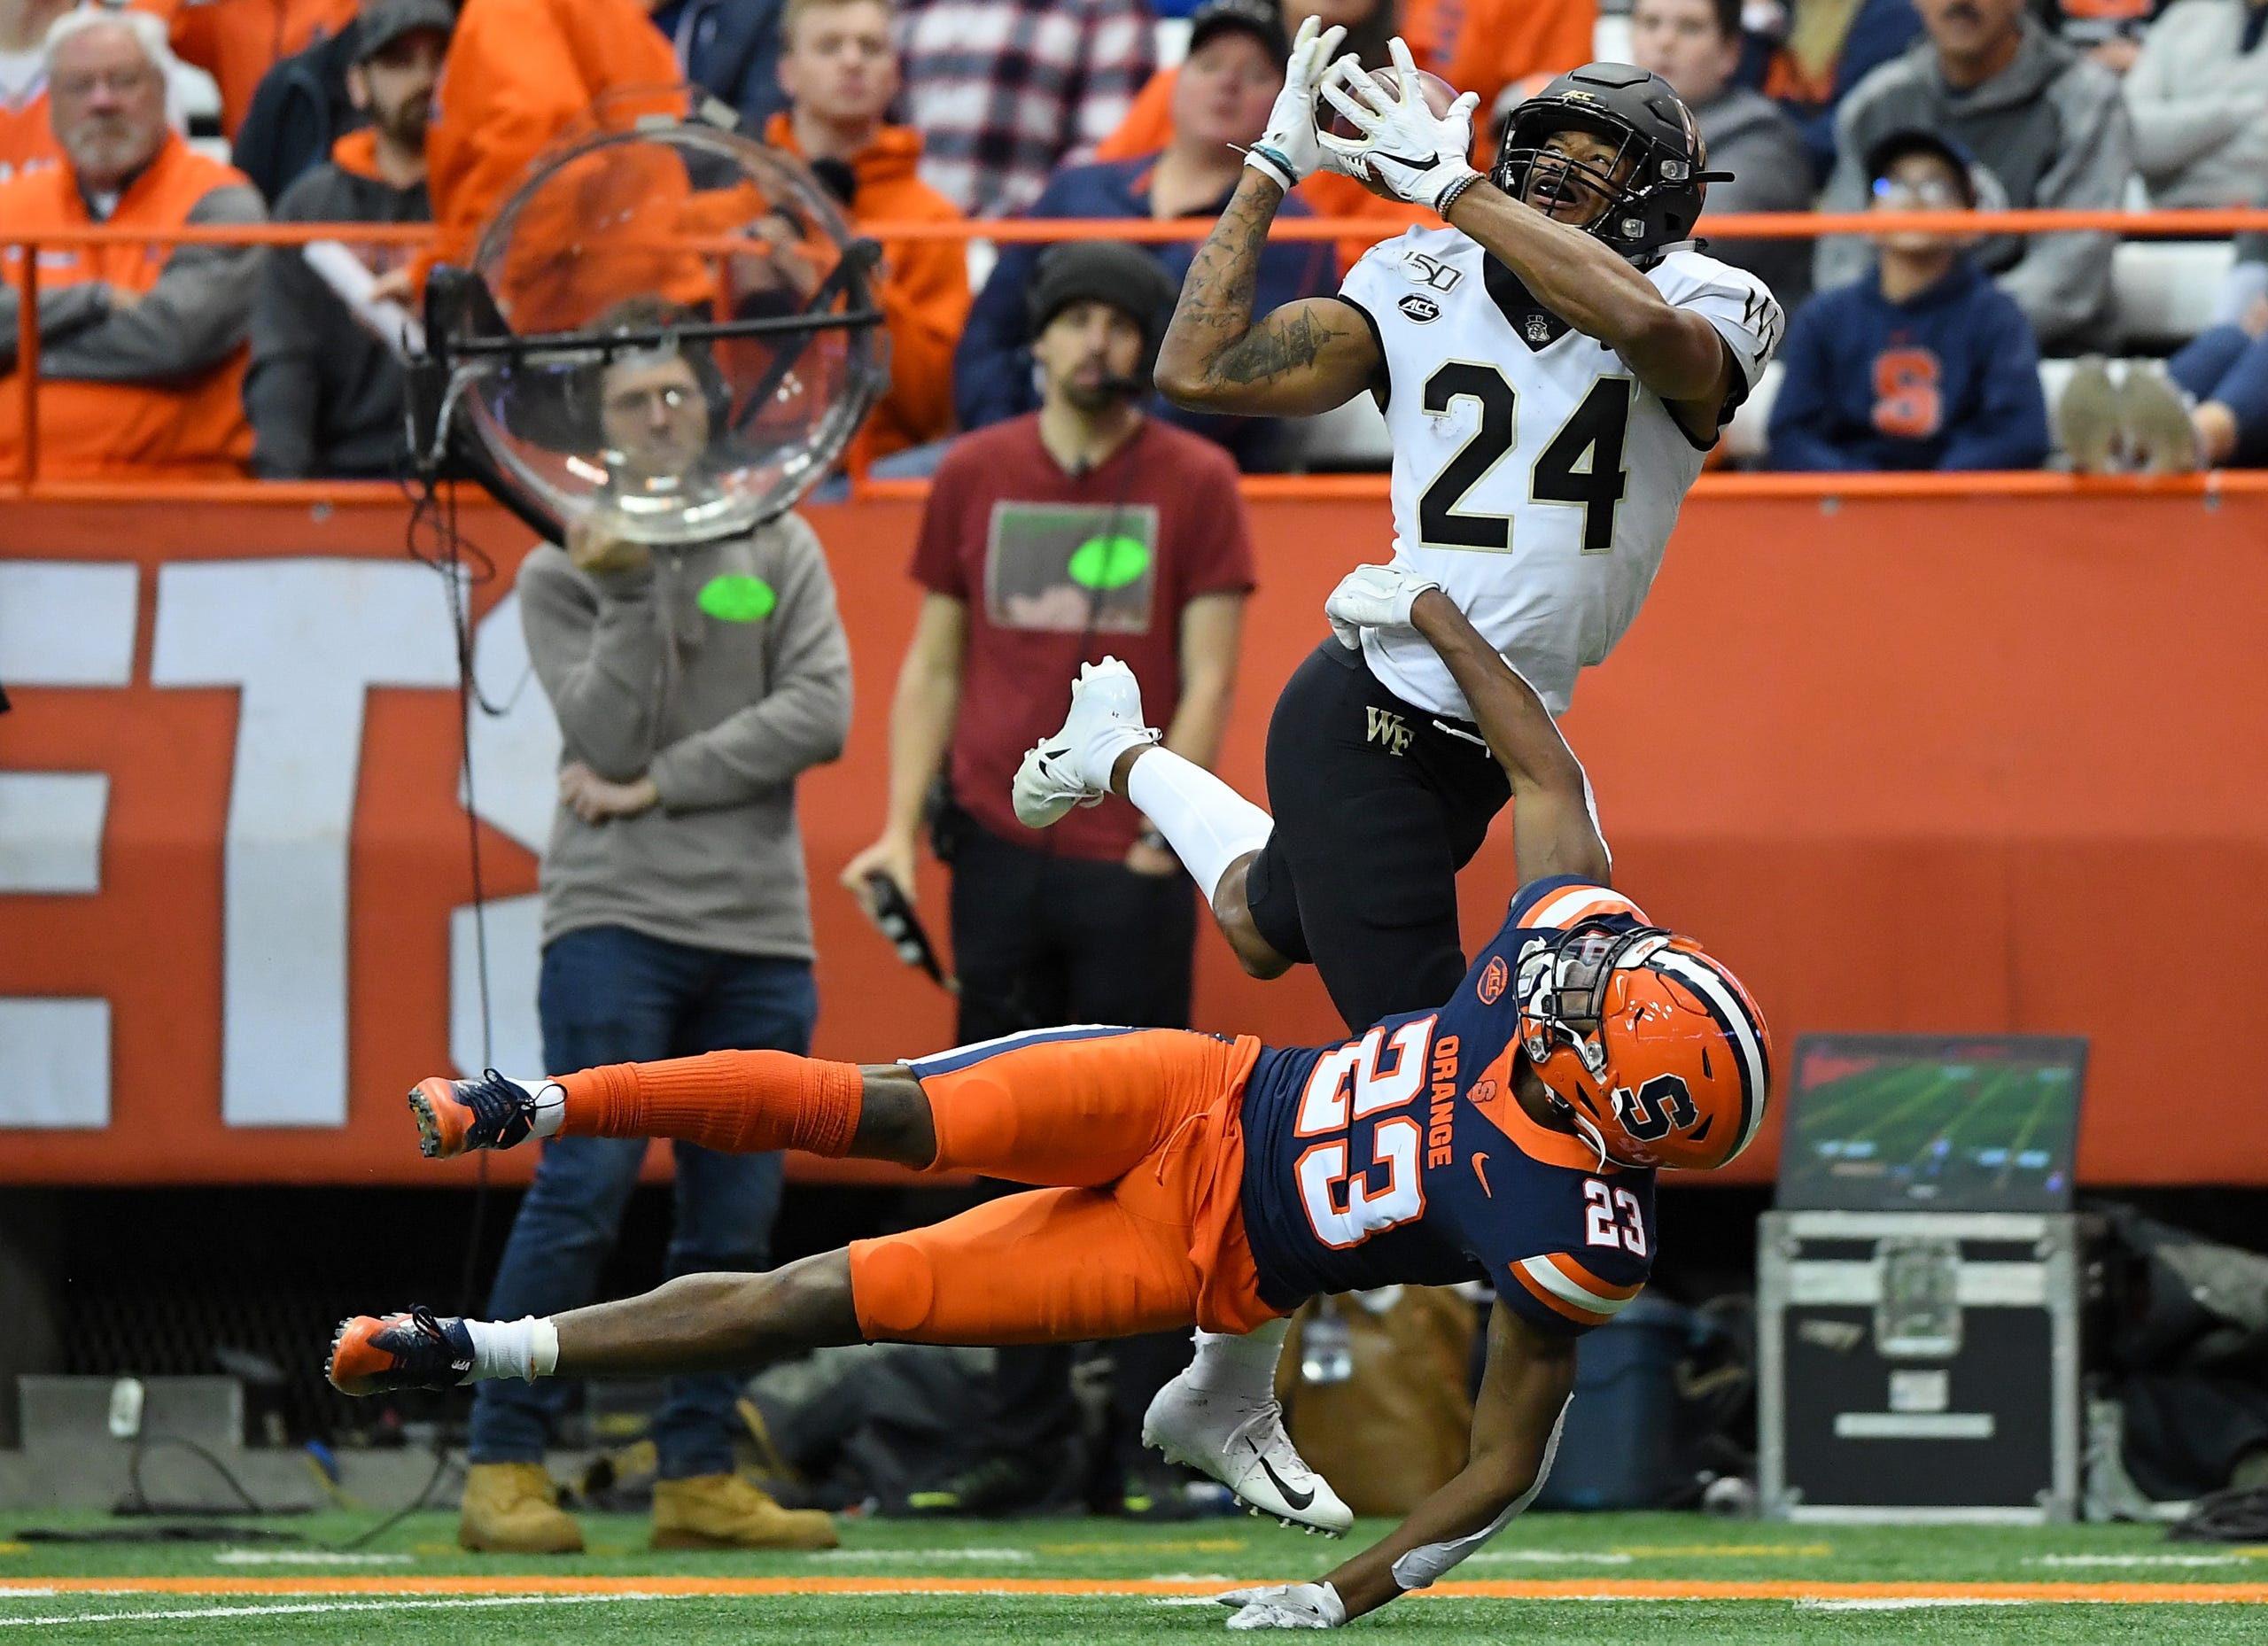 Wake Forest wide receiver Donavon Greene (24) catches a pass as Syracuse Orange defensive back Ifeatu Melifonwu (23) defends at the Carrier Dome on Nov. 30, 2019.